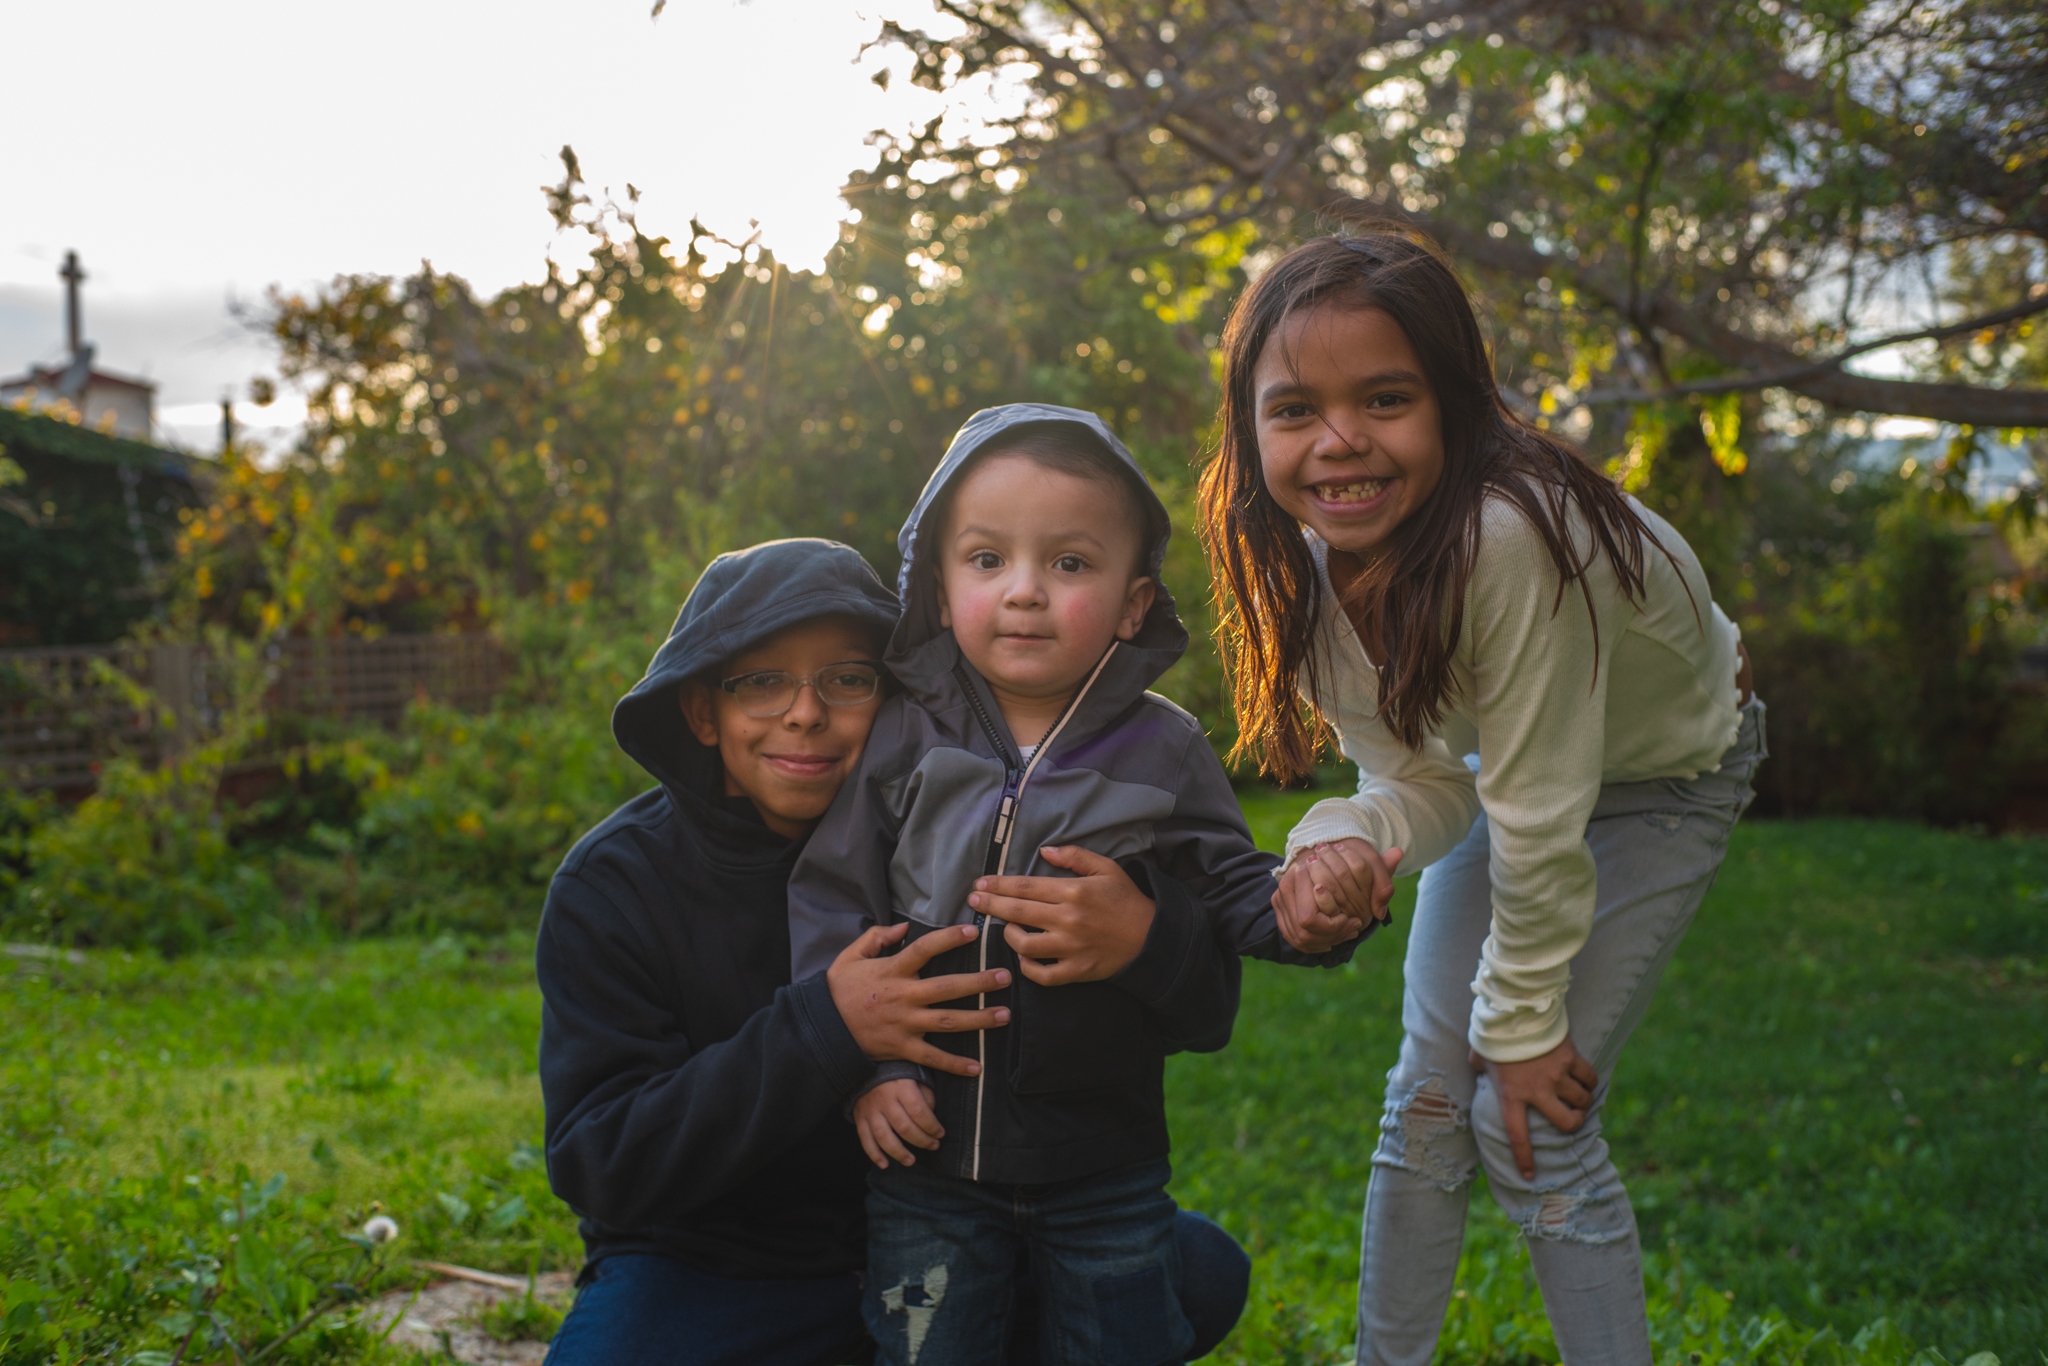 Los Angeles photographer Michael de la Guerra's photo of three children smiling in a backyard during sunset.